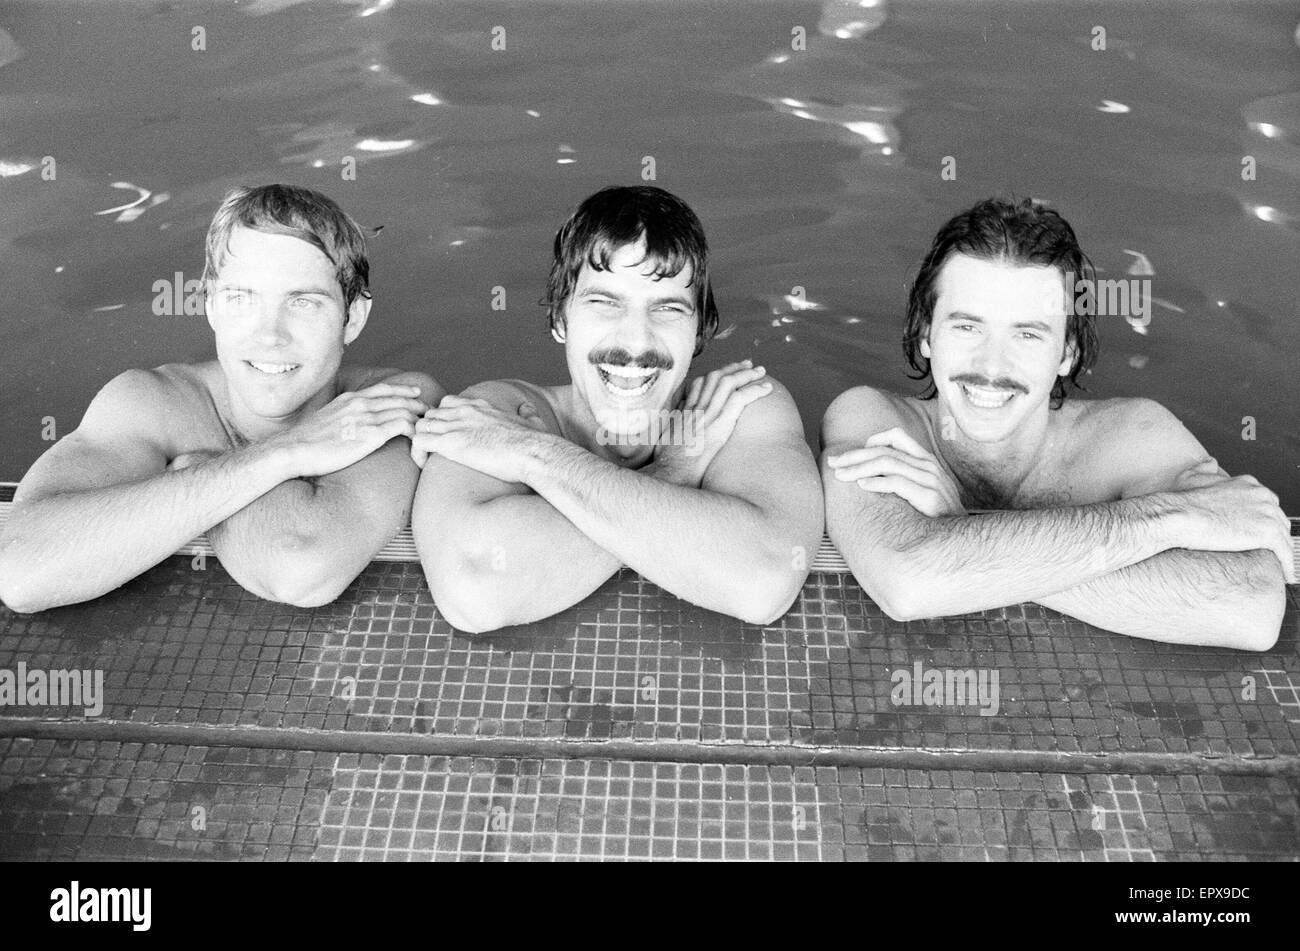 Mark Spitz (centre), USA Olympic Champion, seven x gold medals at the 1972 Munich Olympic Games, pictured with David Wilkie (right), British Olympic Champion, 200 metre breaststroke 1976 Montreal Olympics. Gary Hall (left) USA Olympic Champion, Silver 196 Stock Photo